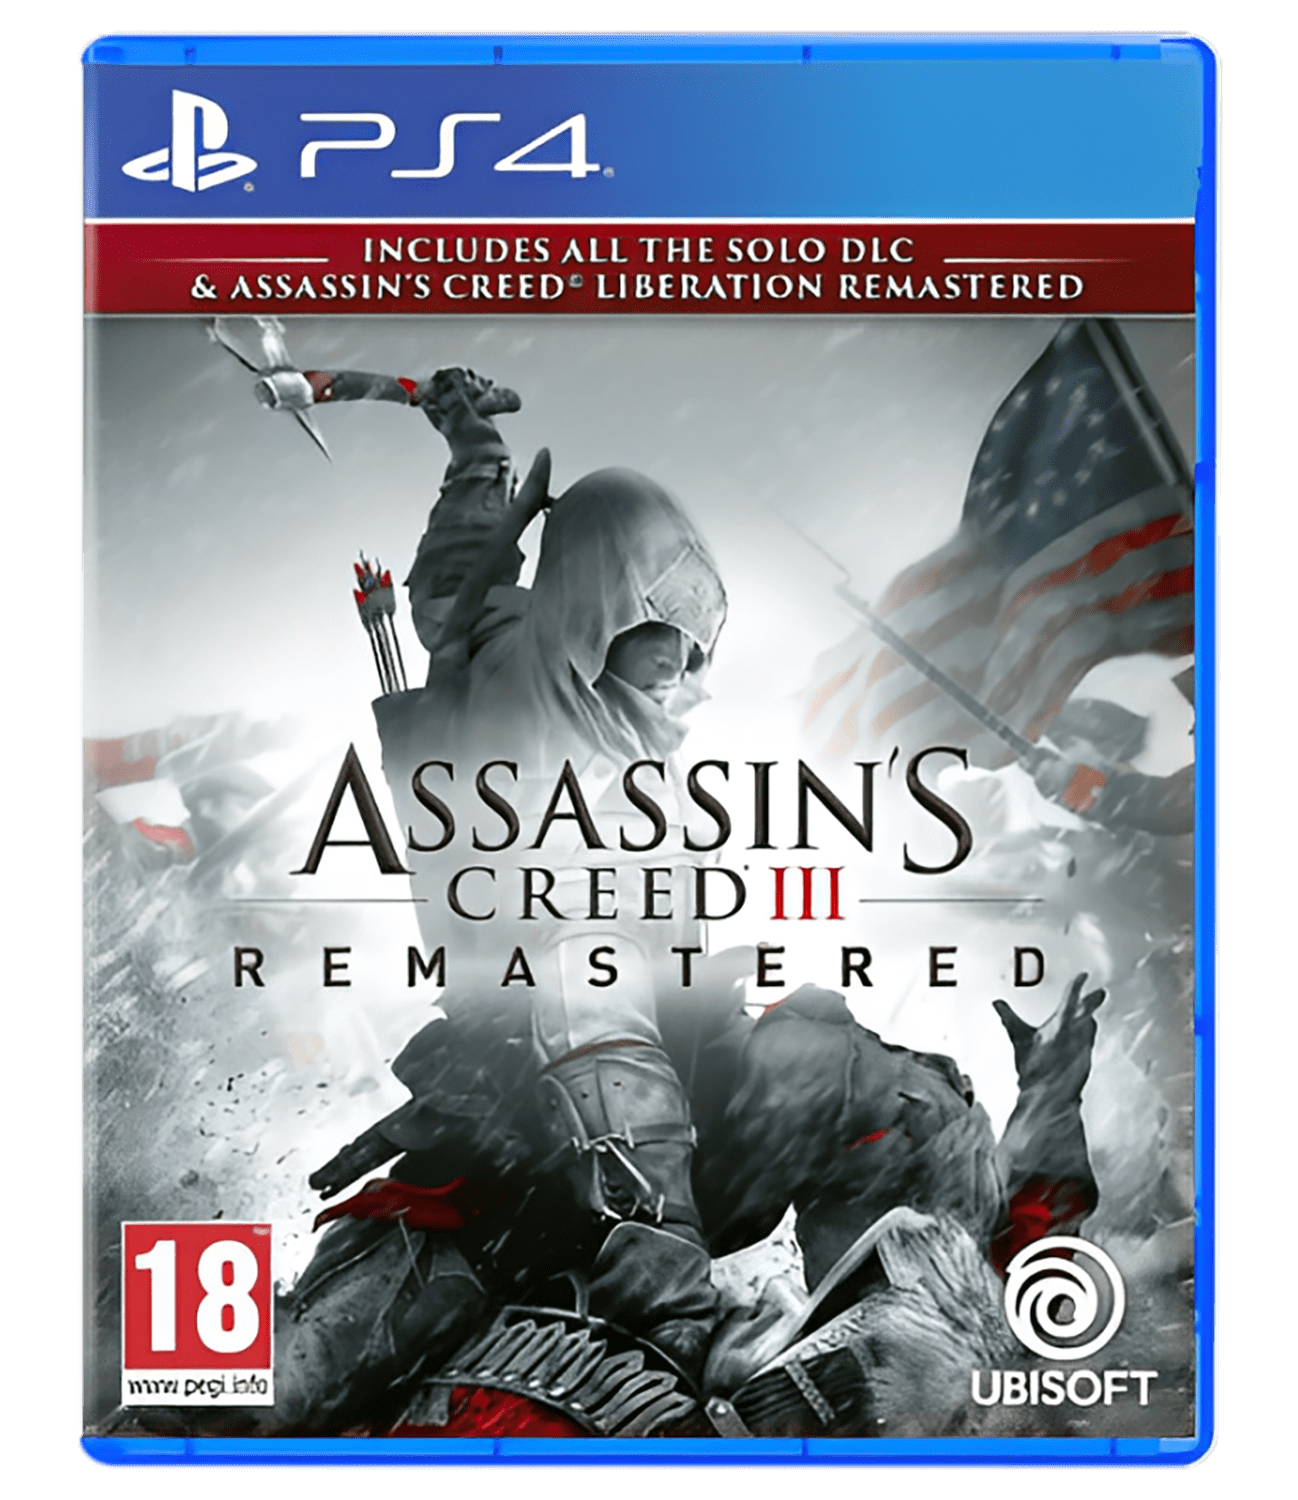 Assassin's Creed III Remastered ps4